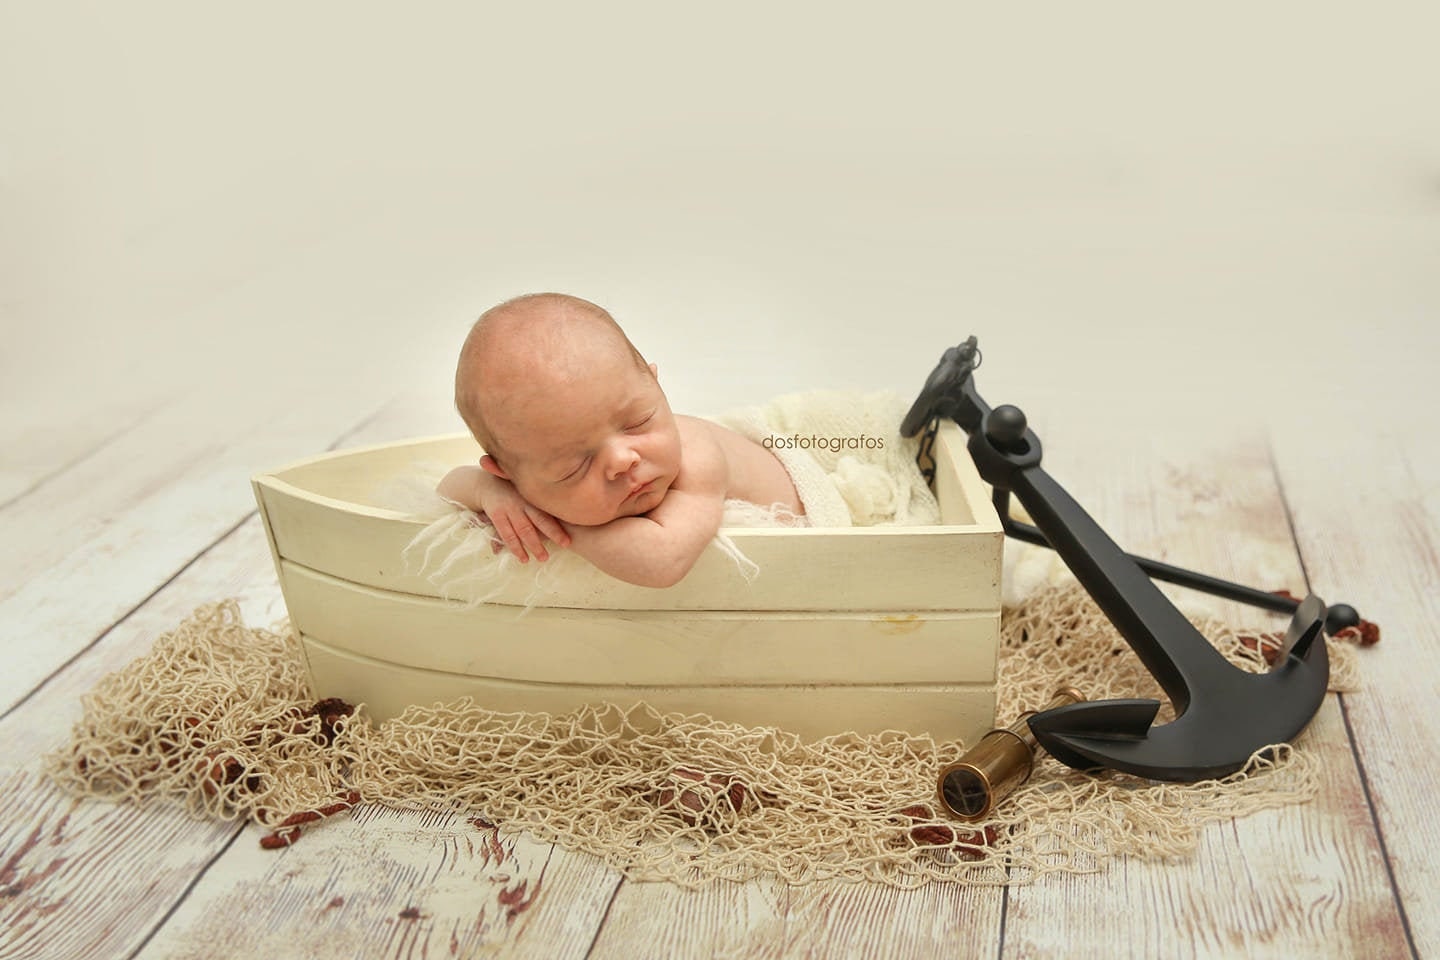 Rustic Boat off White, Newborn Photography Prop Ready to Ship 